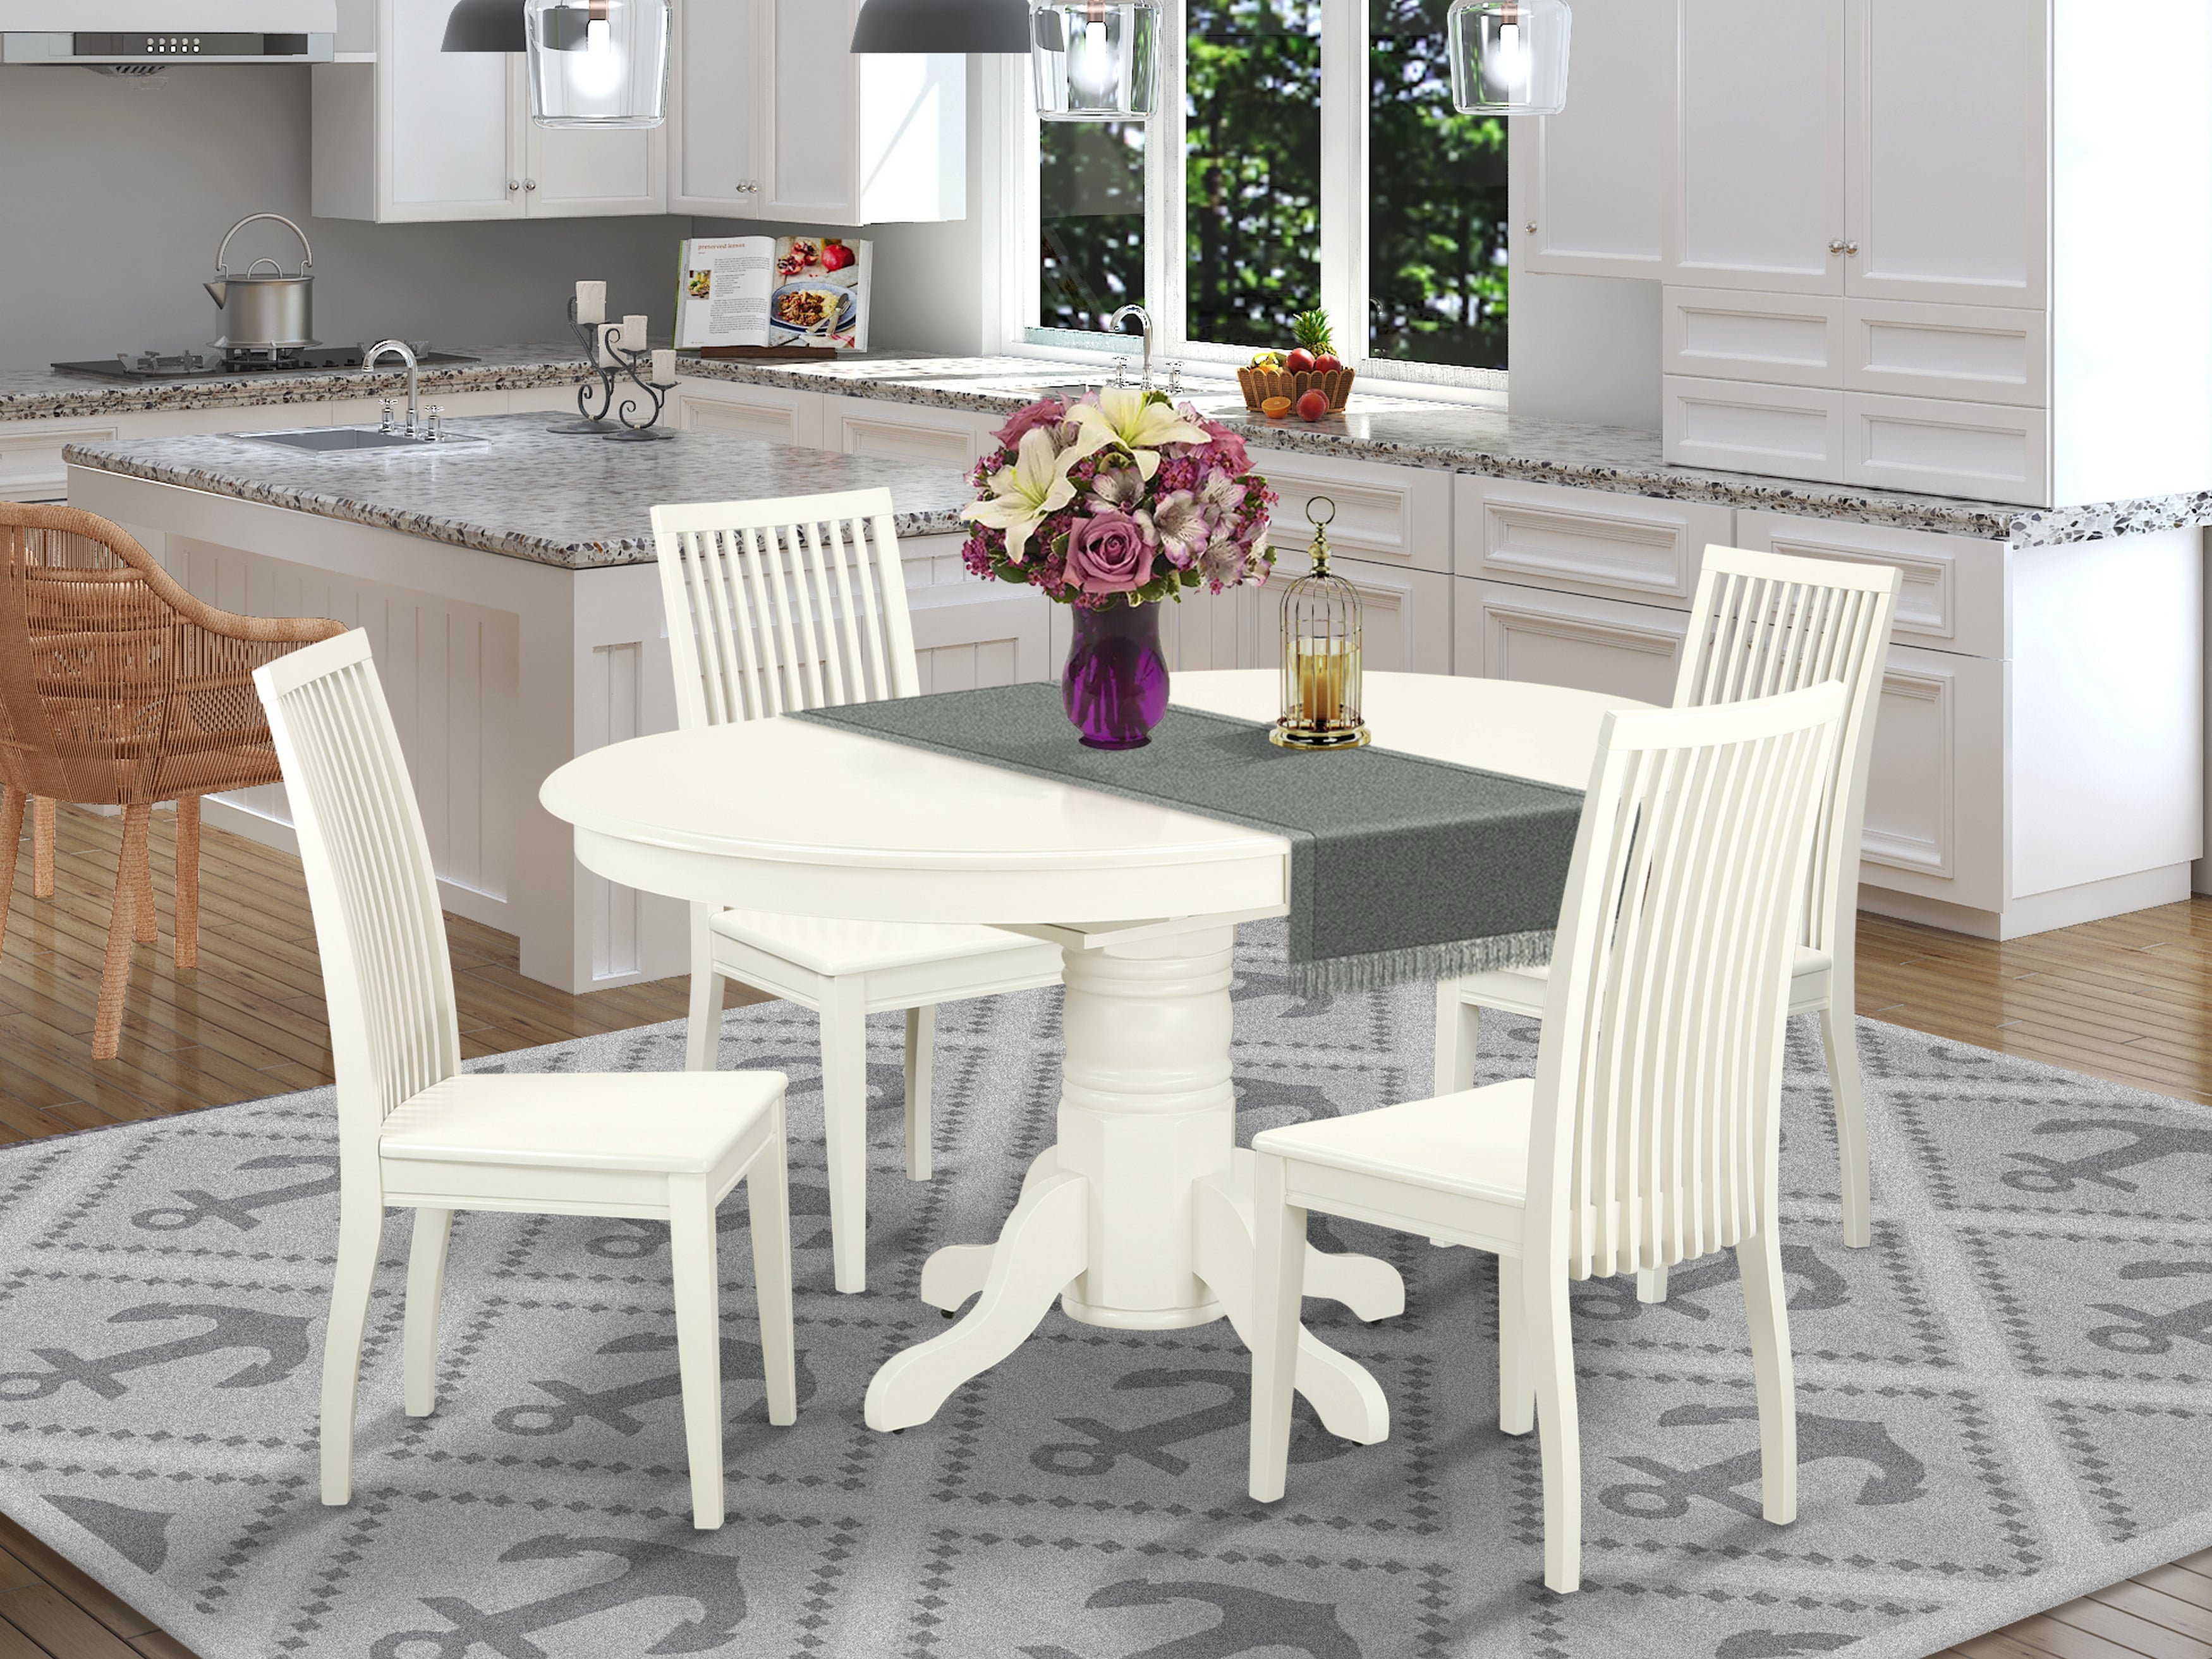 AVIP5-LWH-W 5 Pc Dining set with a Kitchen Table and 4 Wood Seat Kitchen Chairs in Linen White